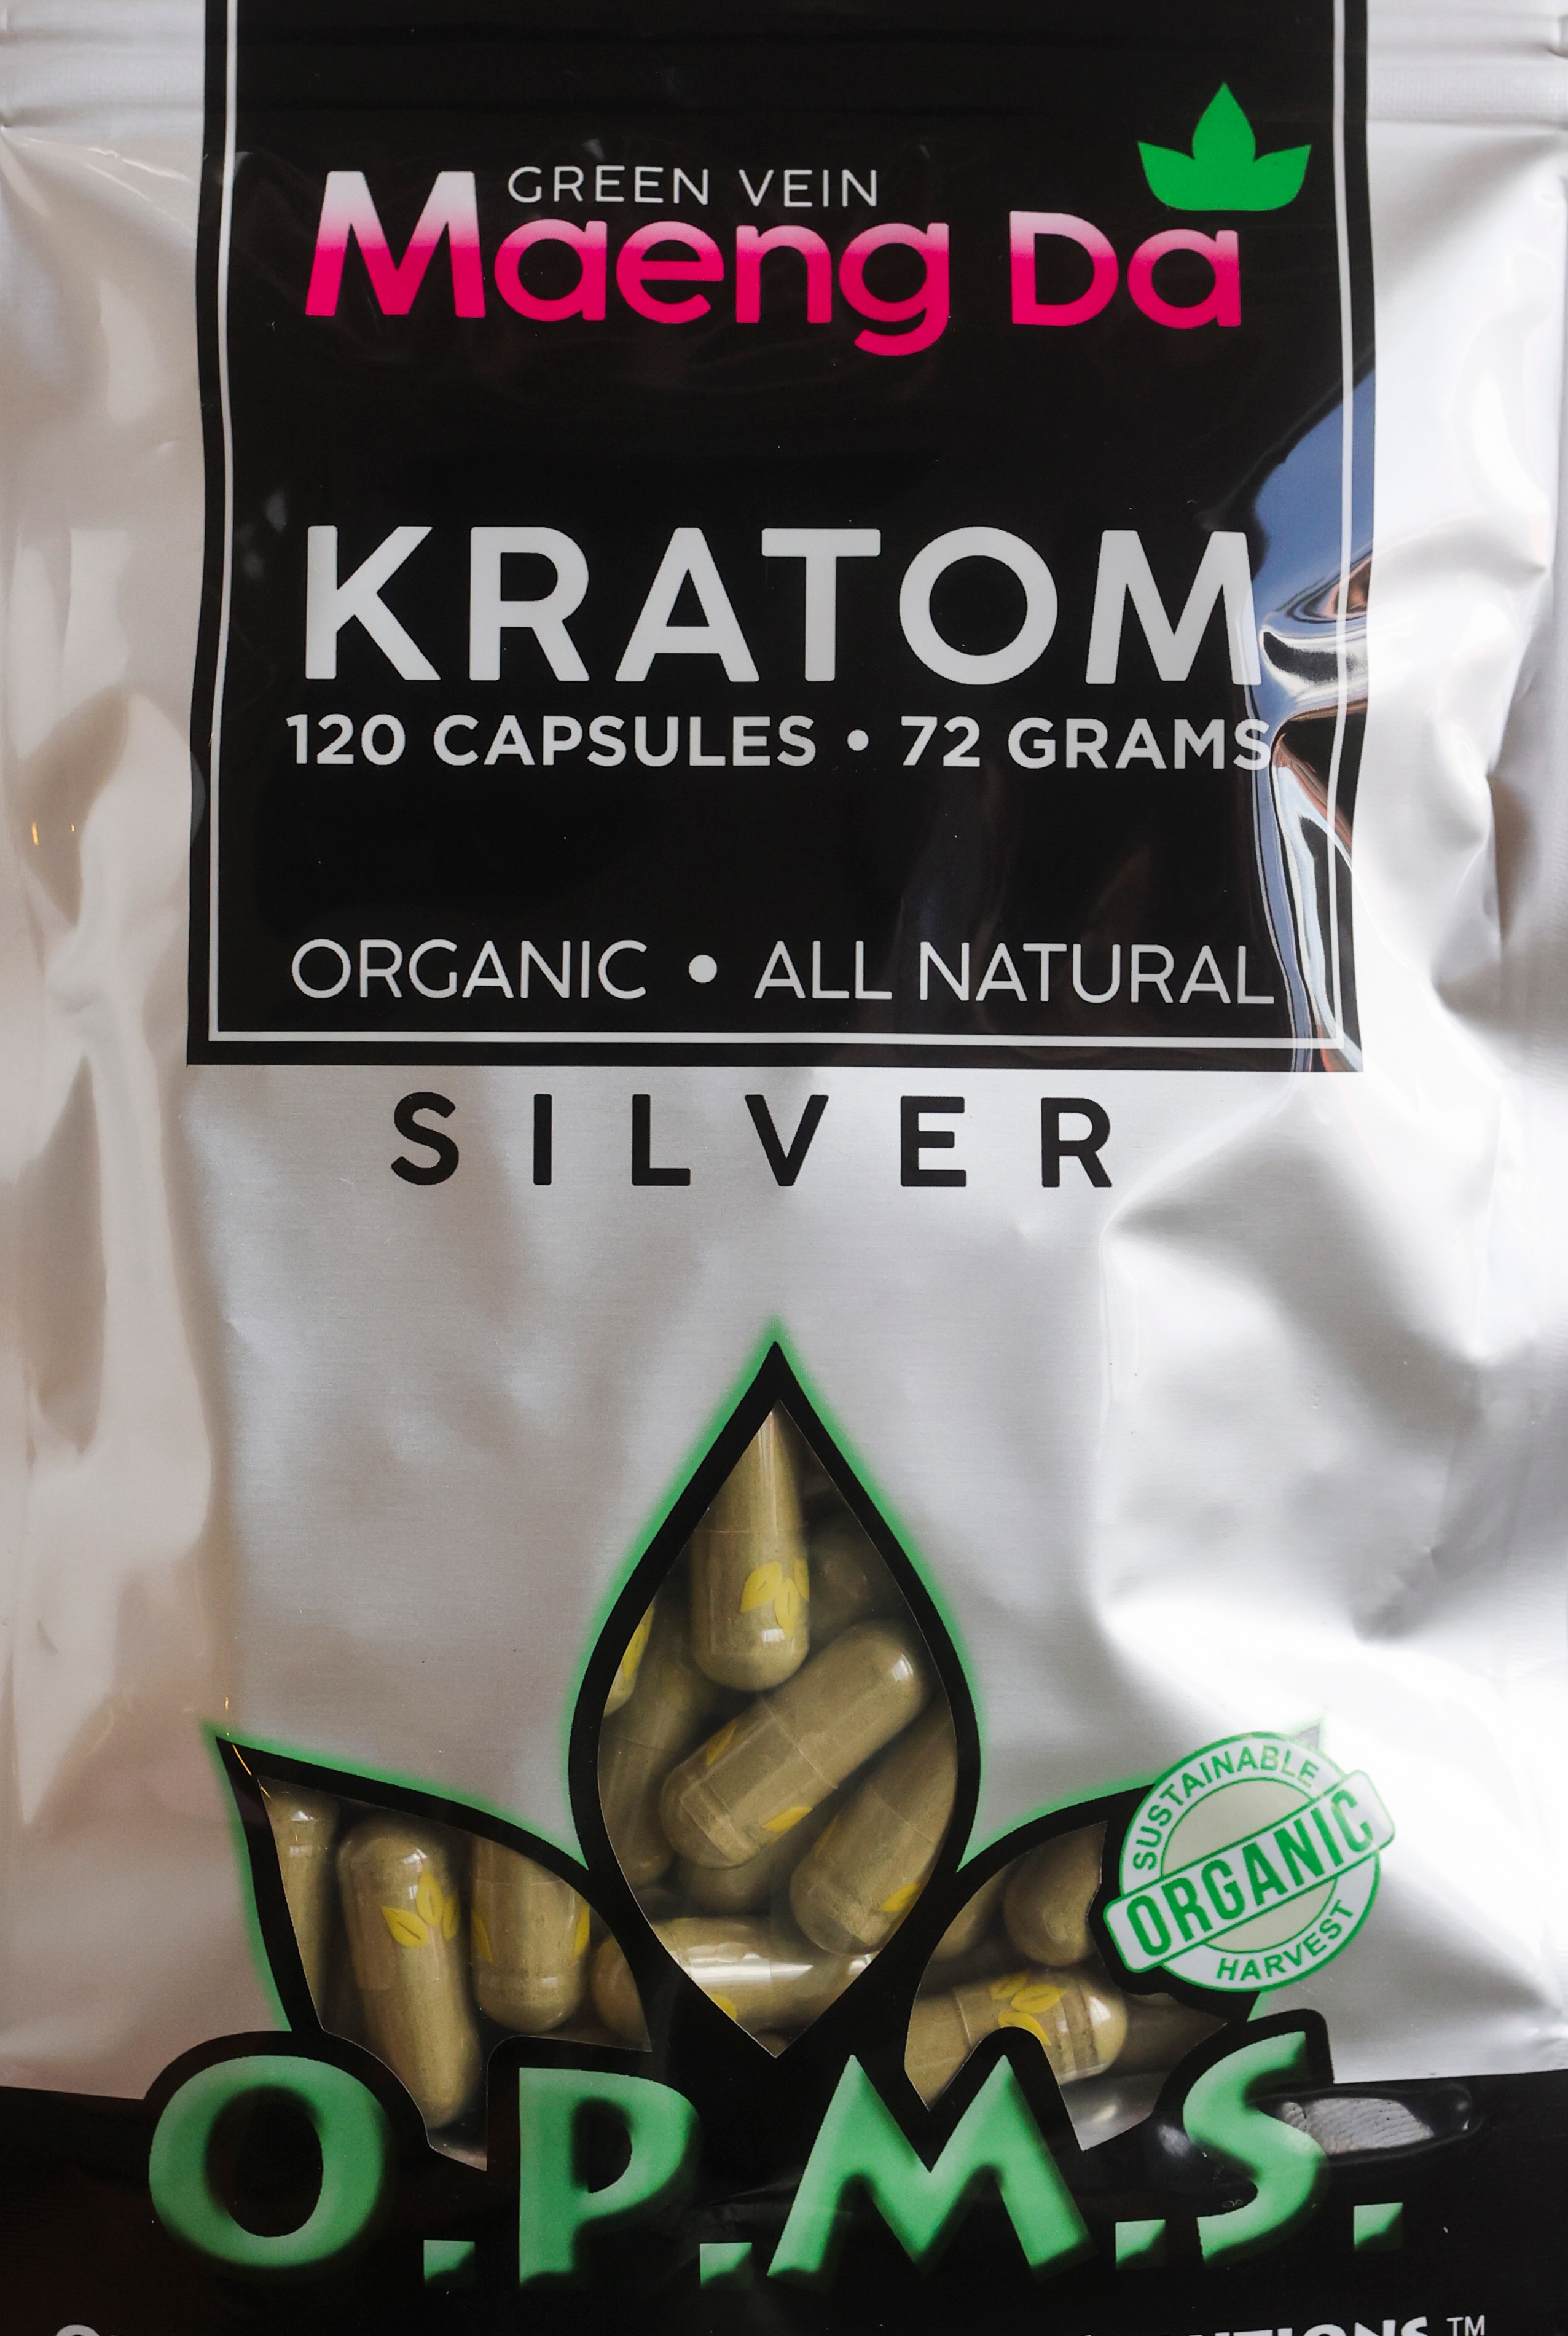 This is O.P.M.S. Silver, a popular kratom product that has been
                    linked to multiple overdose deaths in Florida. The Times found no evidence
                    that O.P.M.S. is a registered company.